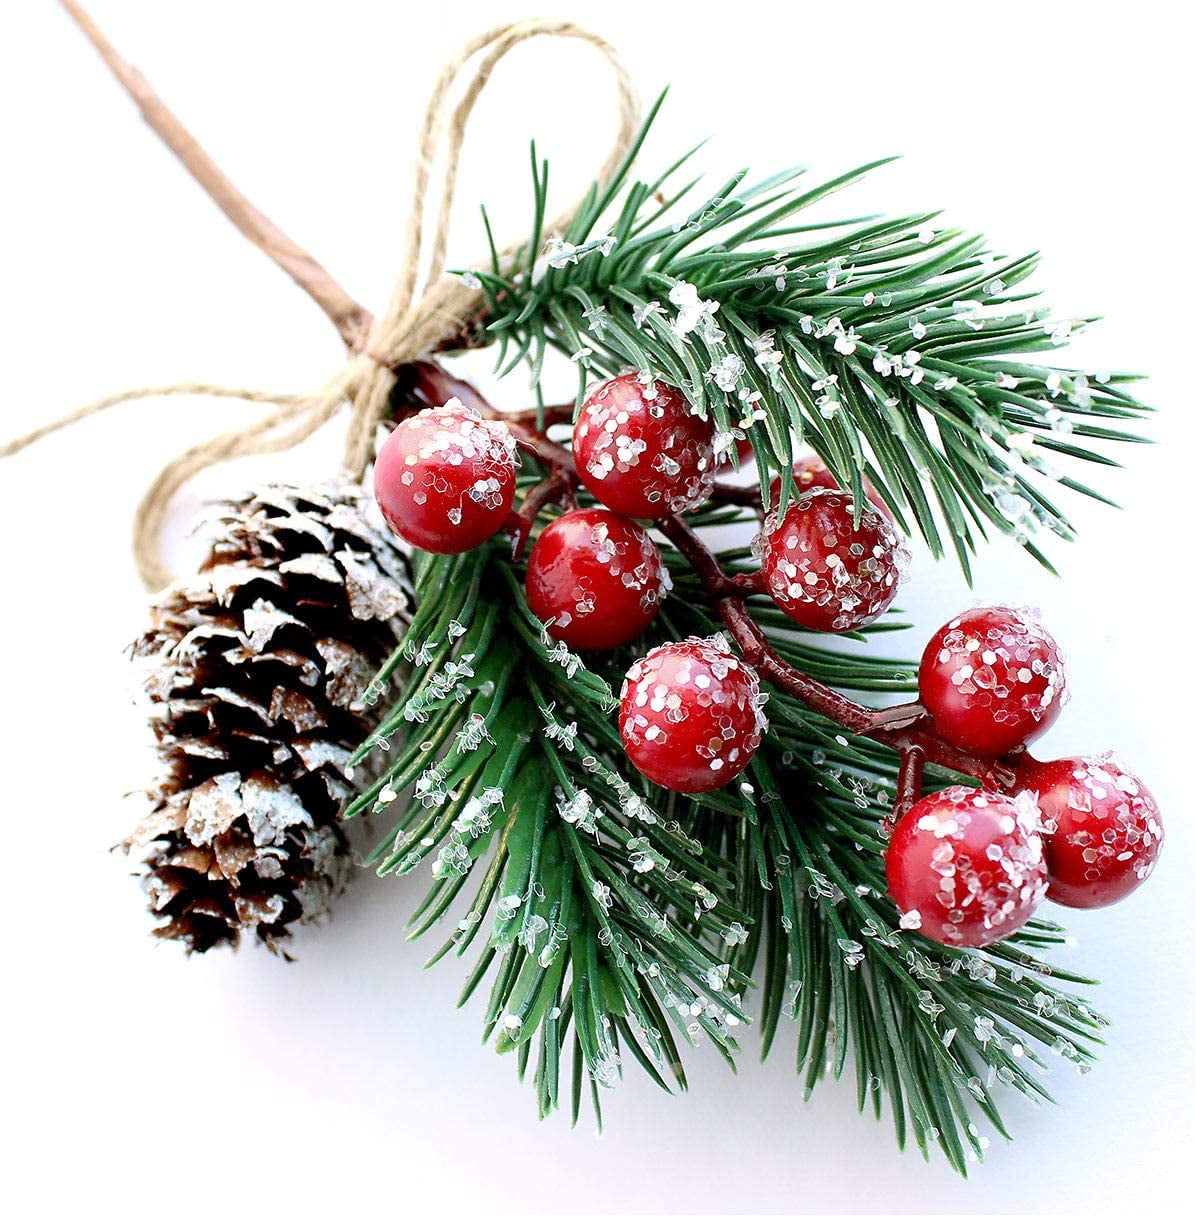 10 Pack Artificial Christmas Picks Assorted Red Berry Picks Stems Faux Pine Branches Spray with Pinecones Apples Holly Leaves for Christmas Floral